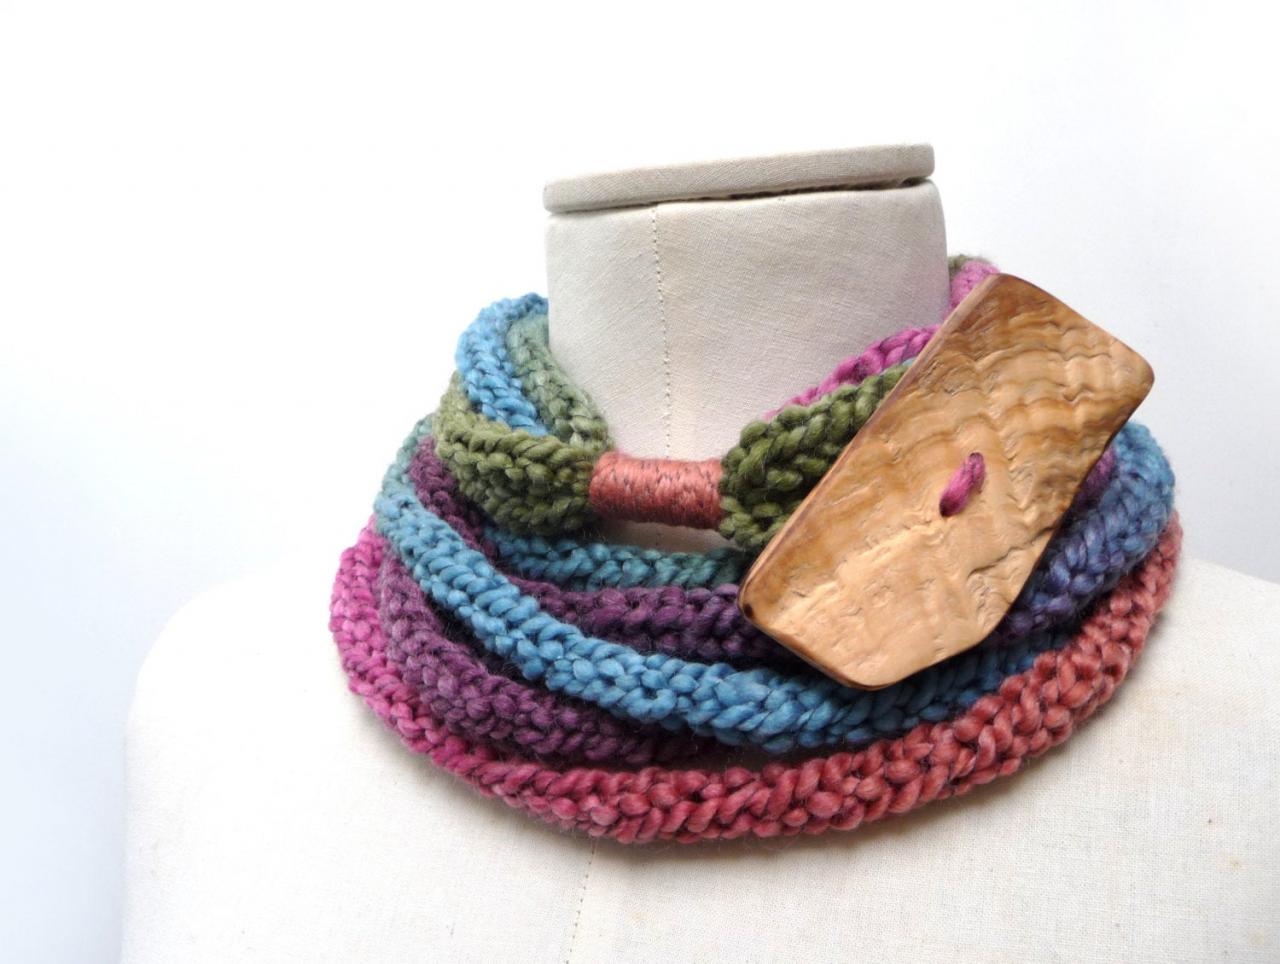 Multicolor Loop Circle Scarf, Chunky Infinity Necklace, Knit Rainbow Yarn With Giant Wood Button, Pink Purple Blue Green And Rusty Orange